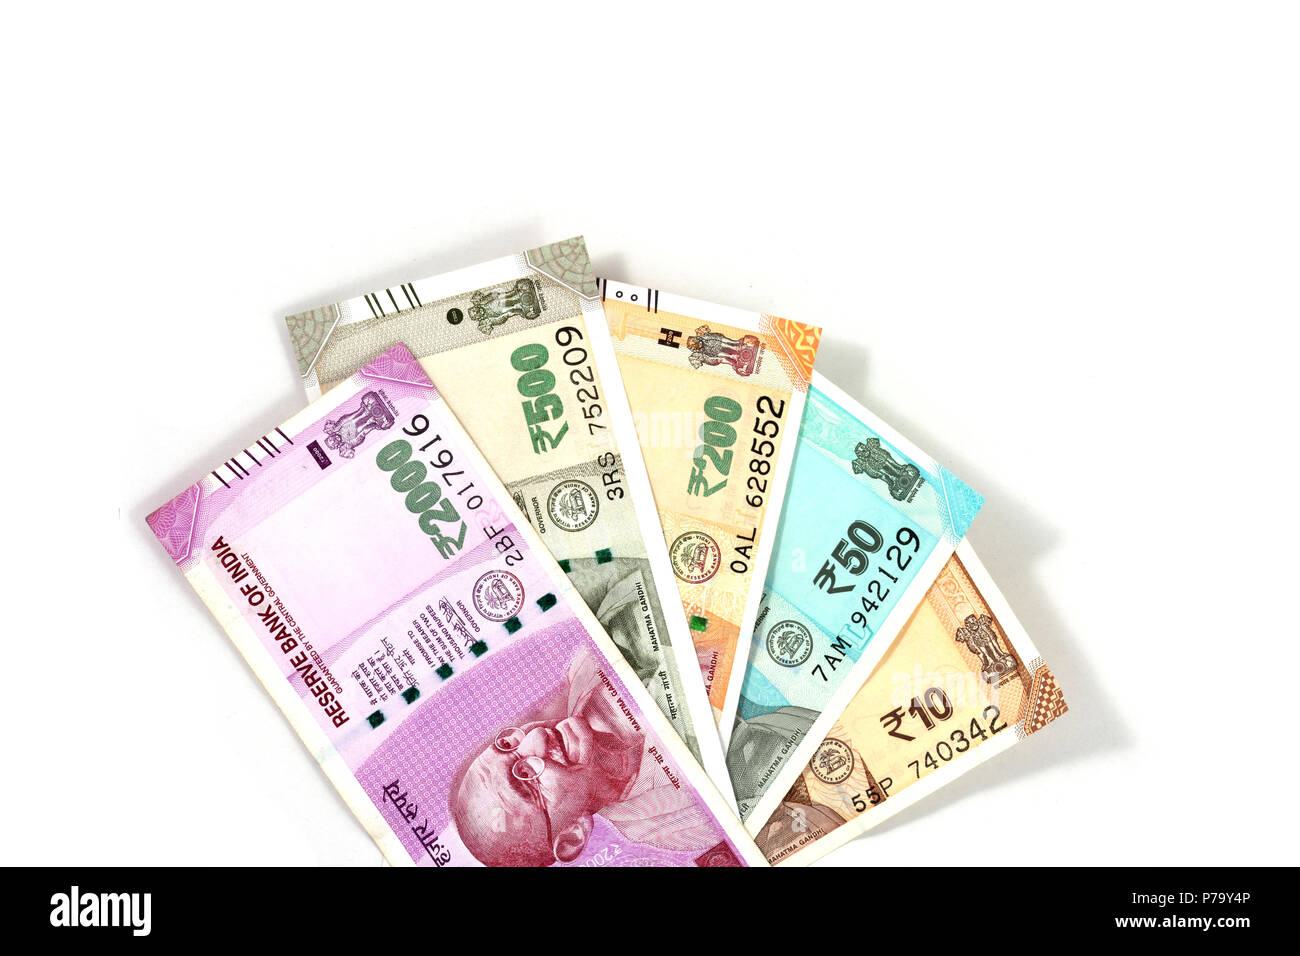 .New Indian currency of 2000,500,200,50 and 10 rupee notes Stock Photo